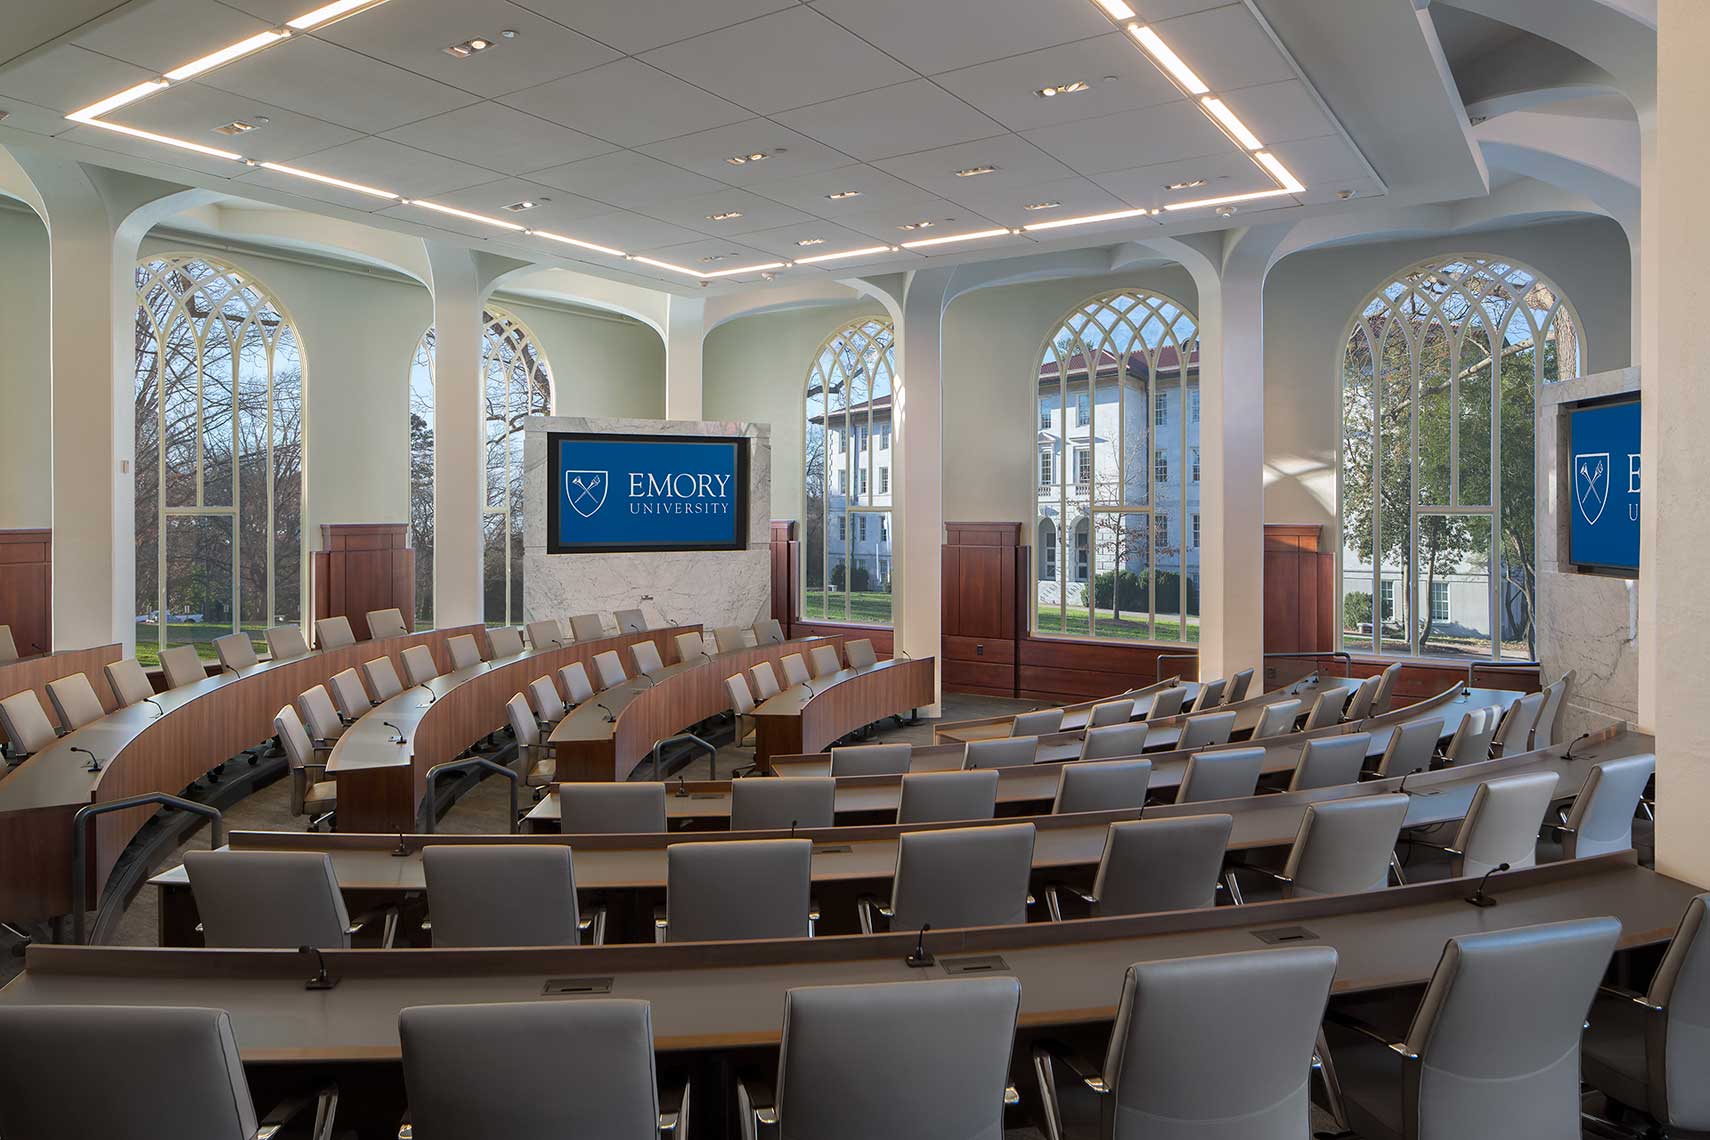 An interior view of the Convocation Hall at Emory University